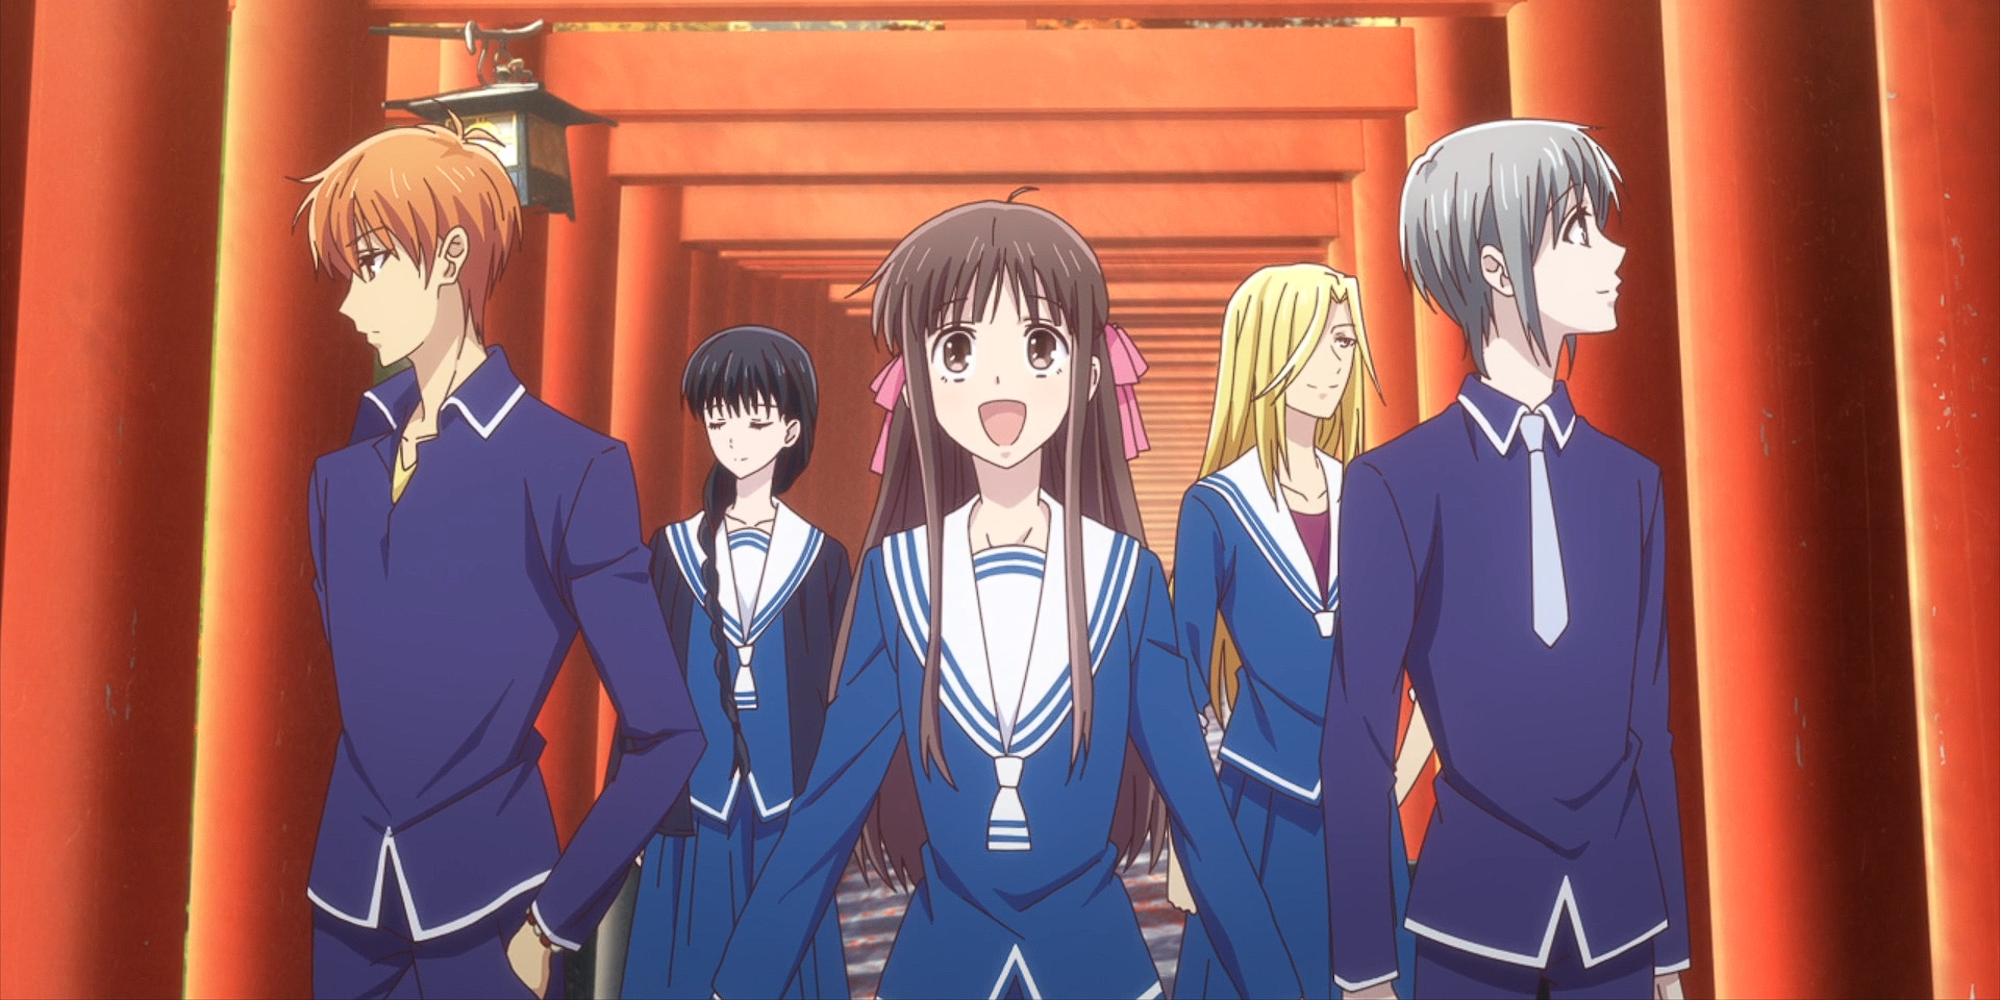 Fruits Basket Tohru and her friends walking through the red gates